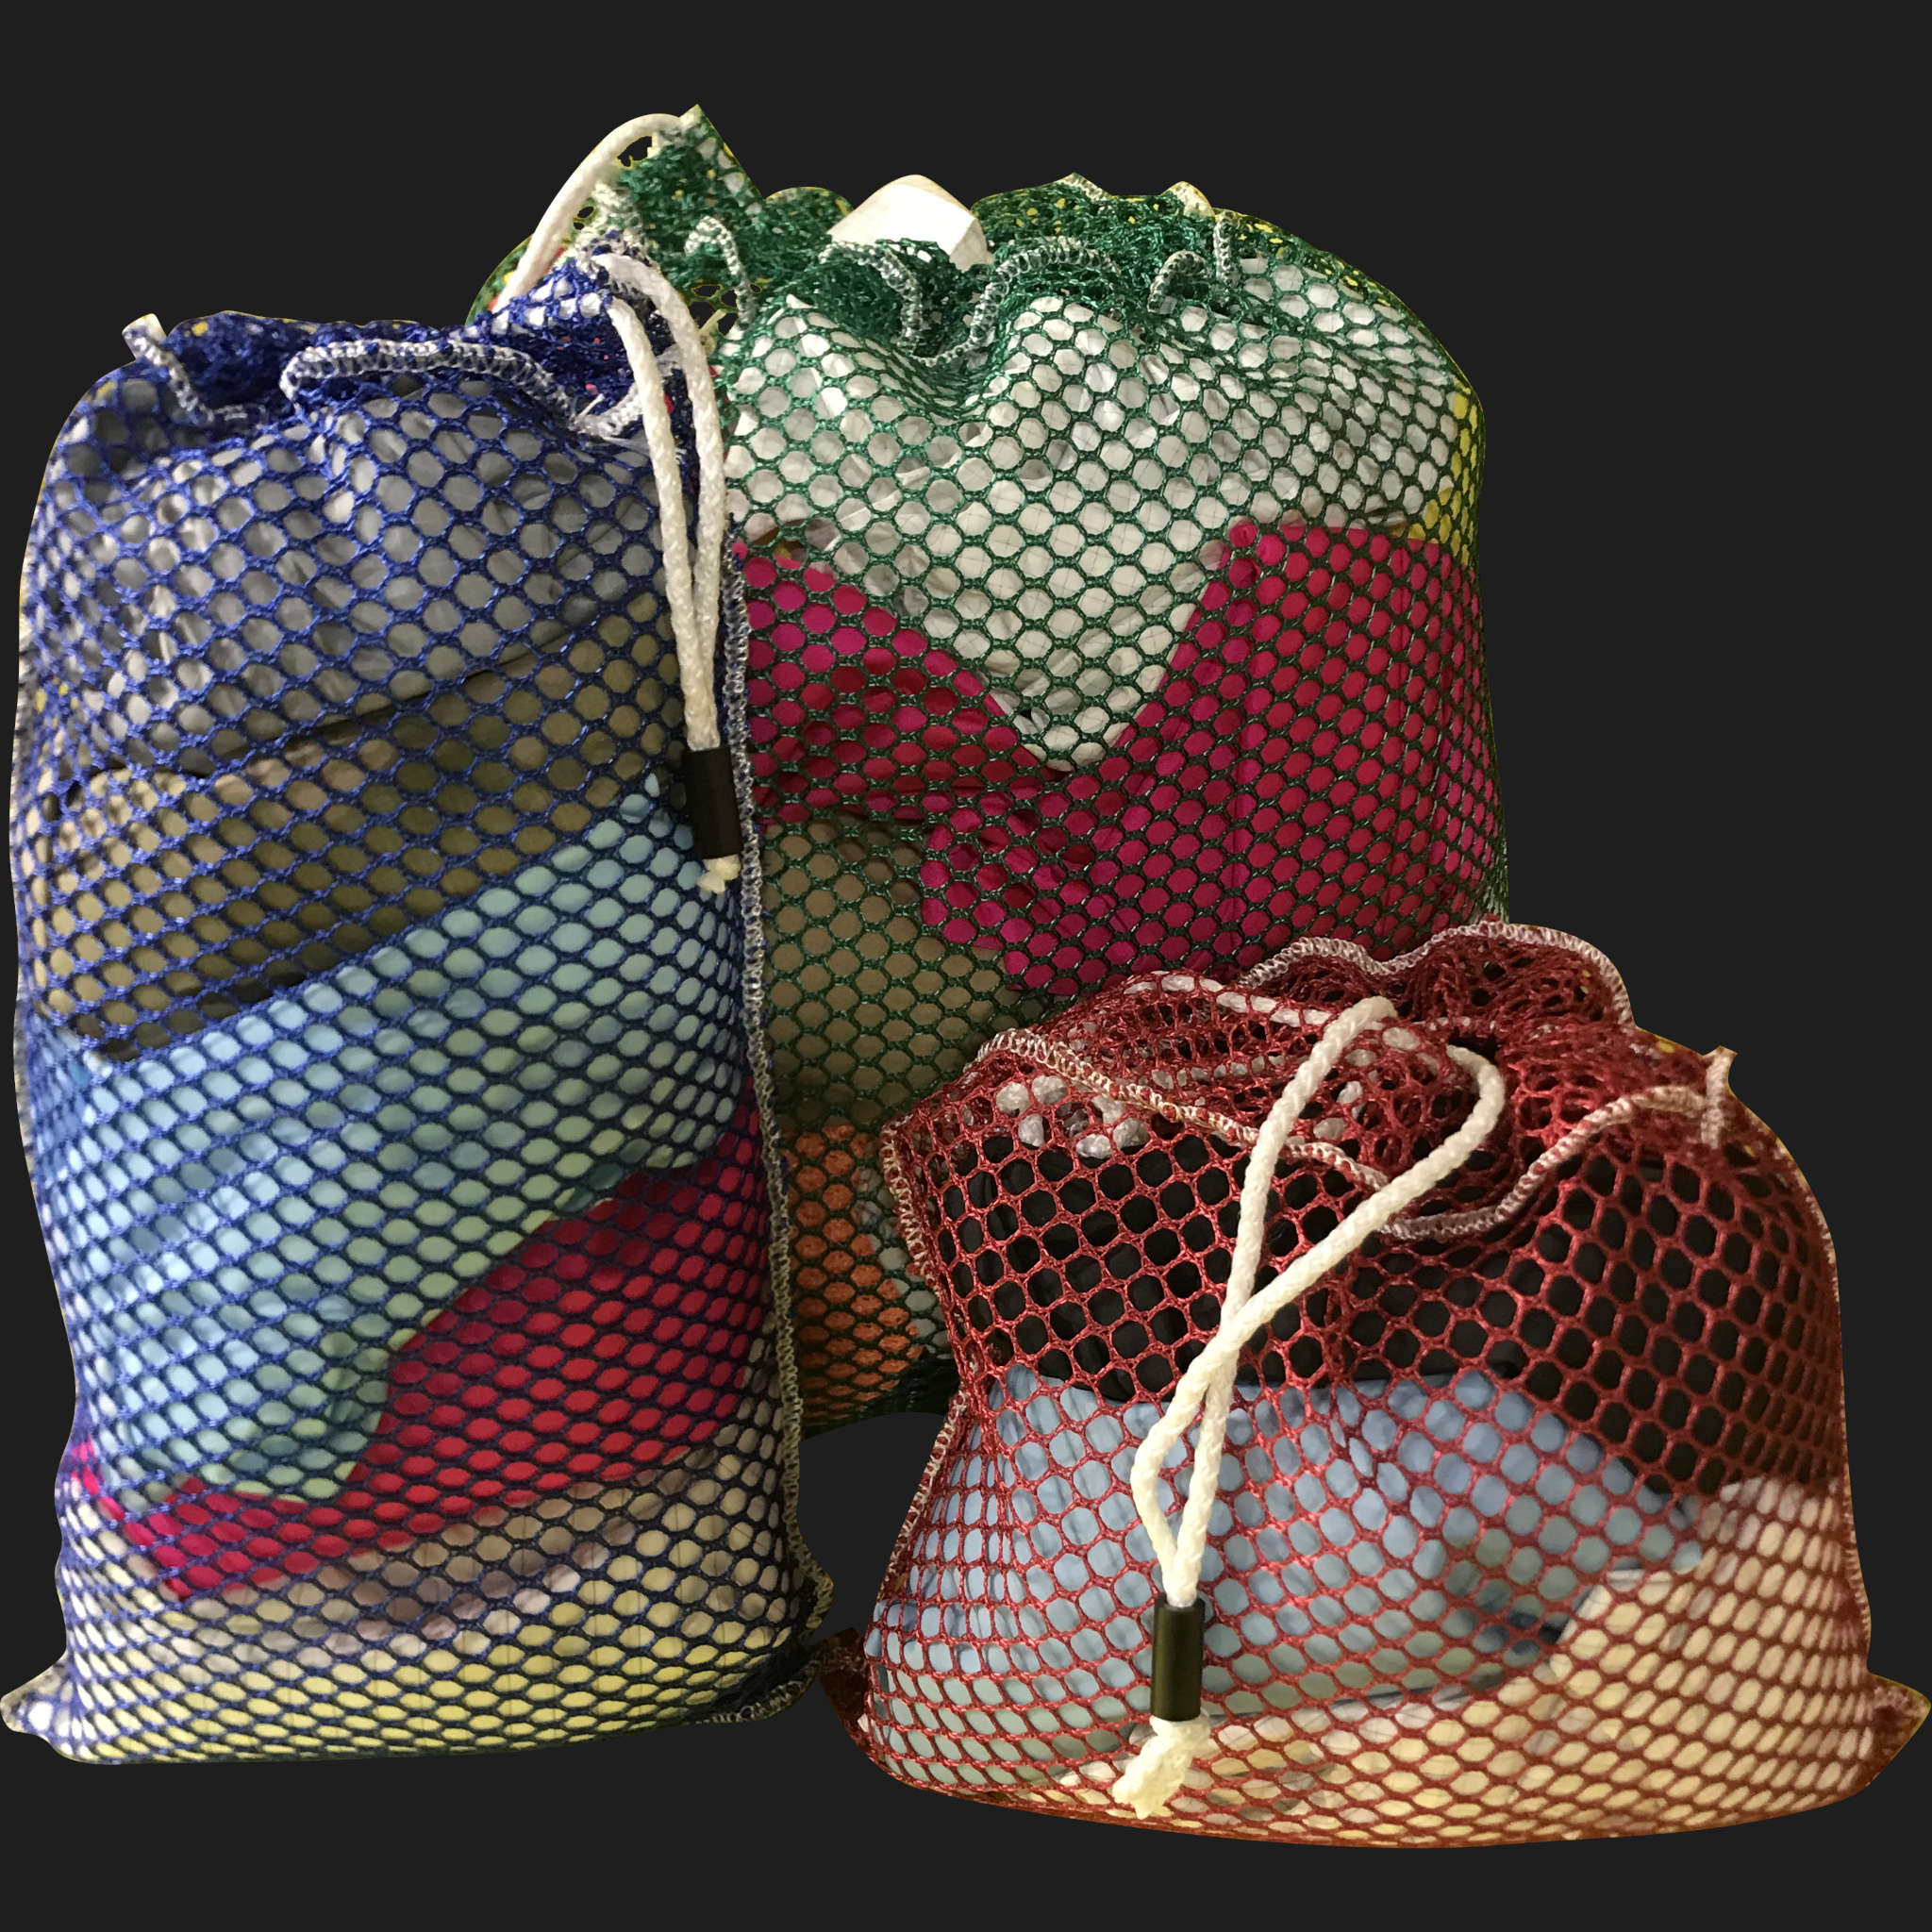 14" x 20" Customized Mesh-Net-Laundry Bags Heavy Duty with Cord and barrellock closure